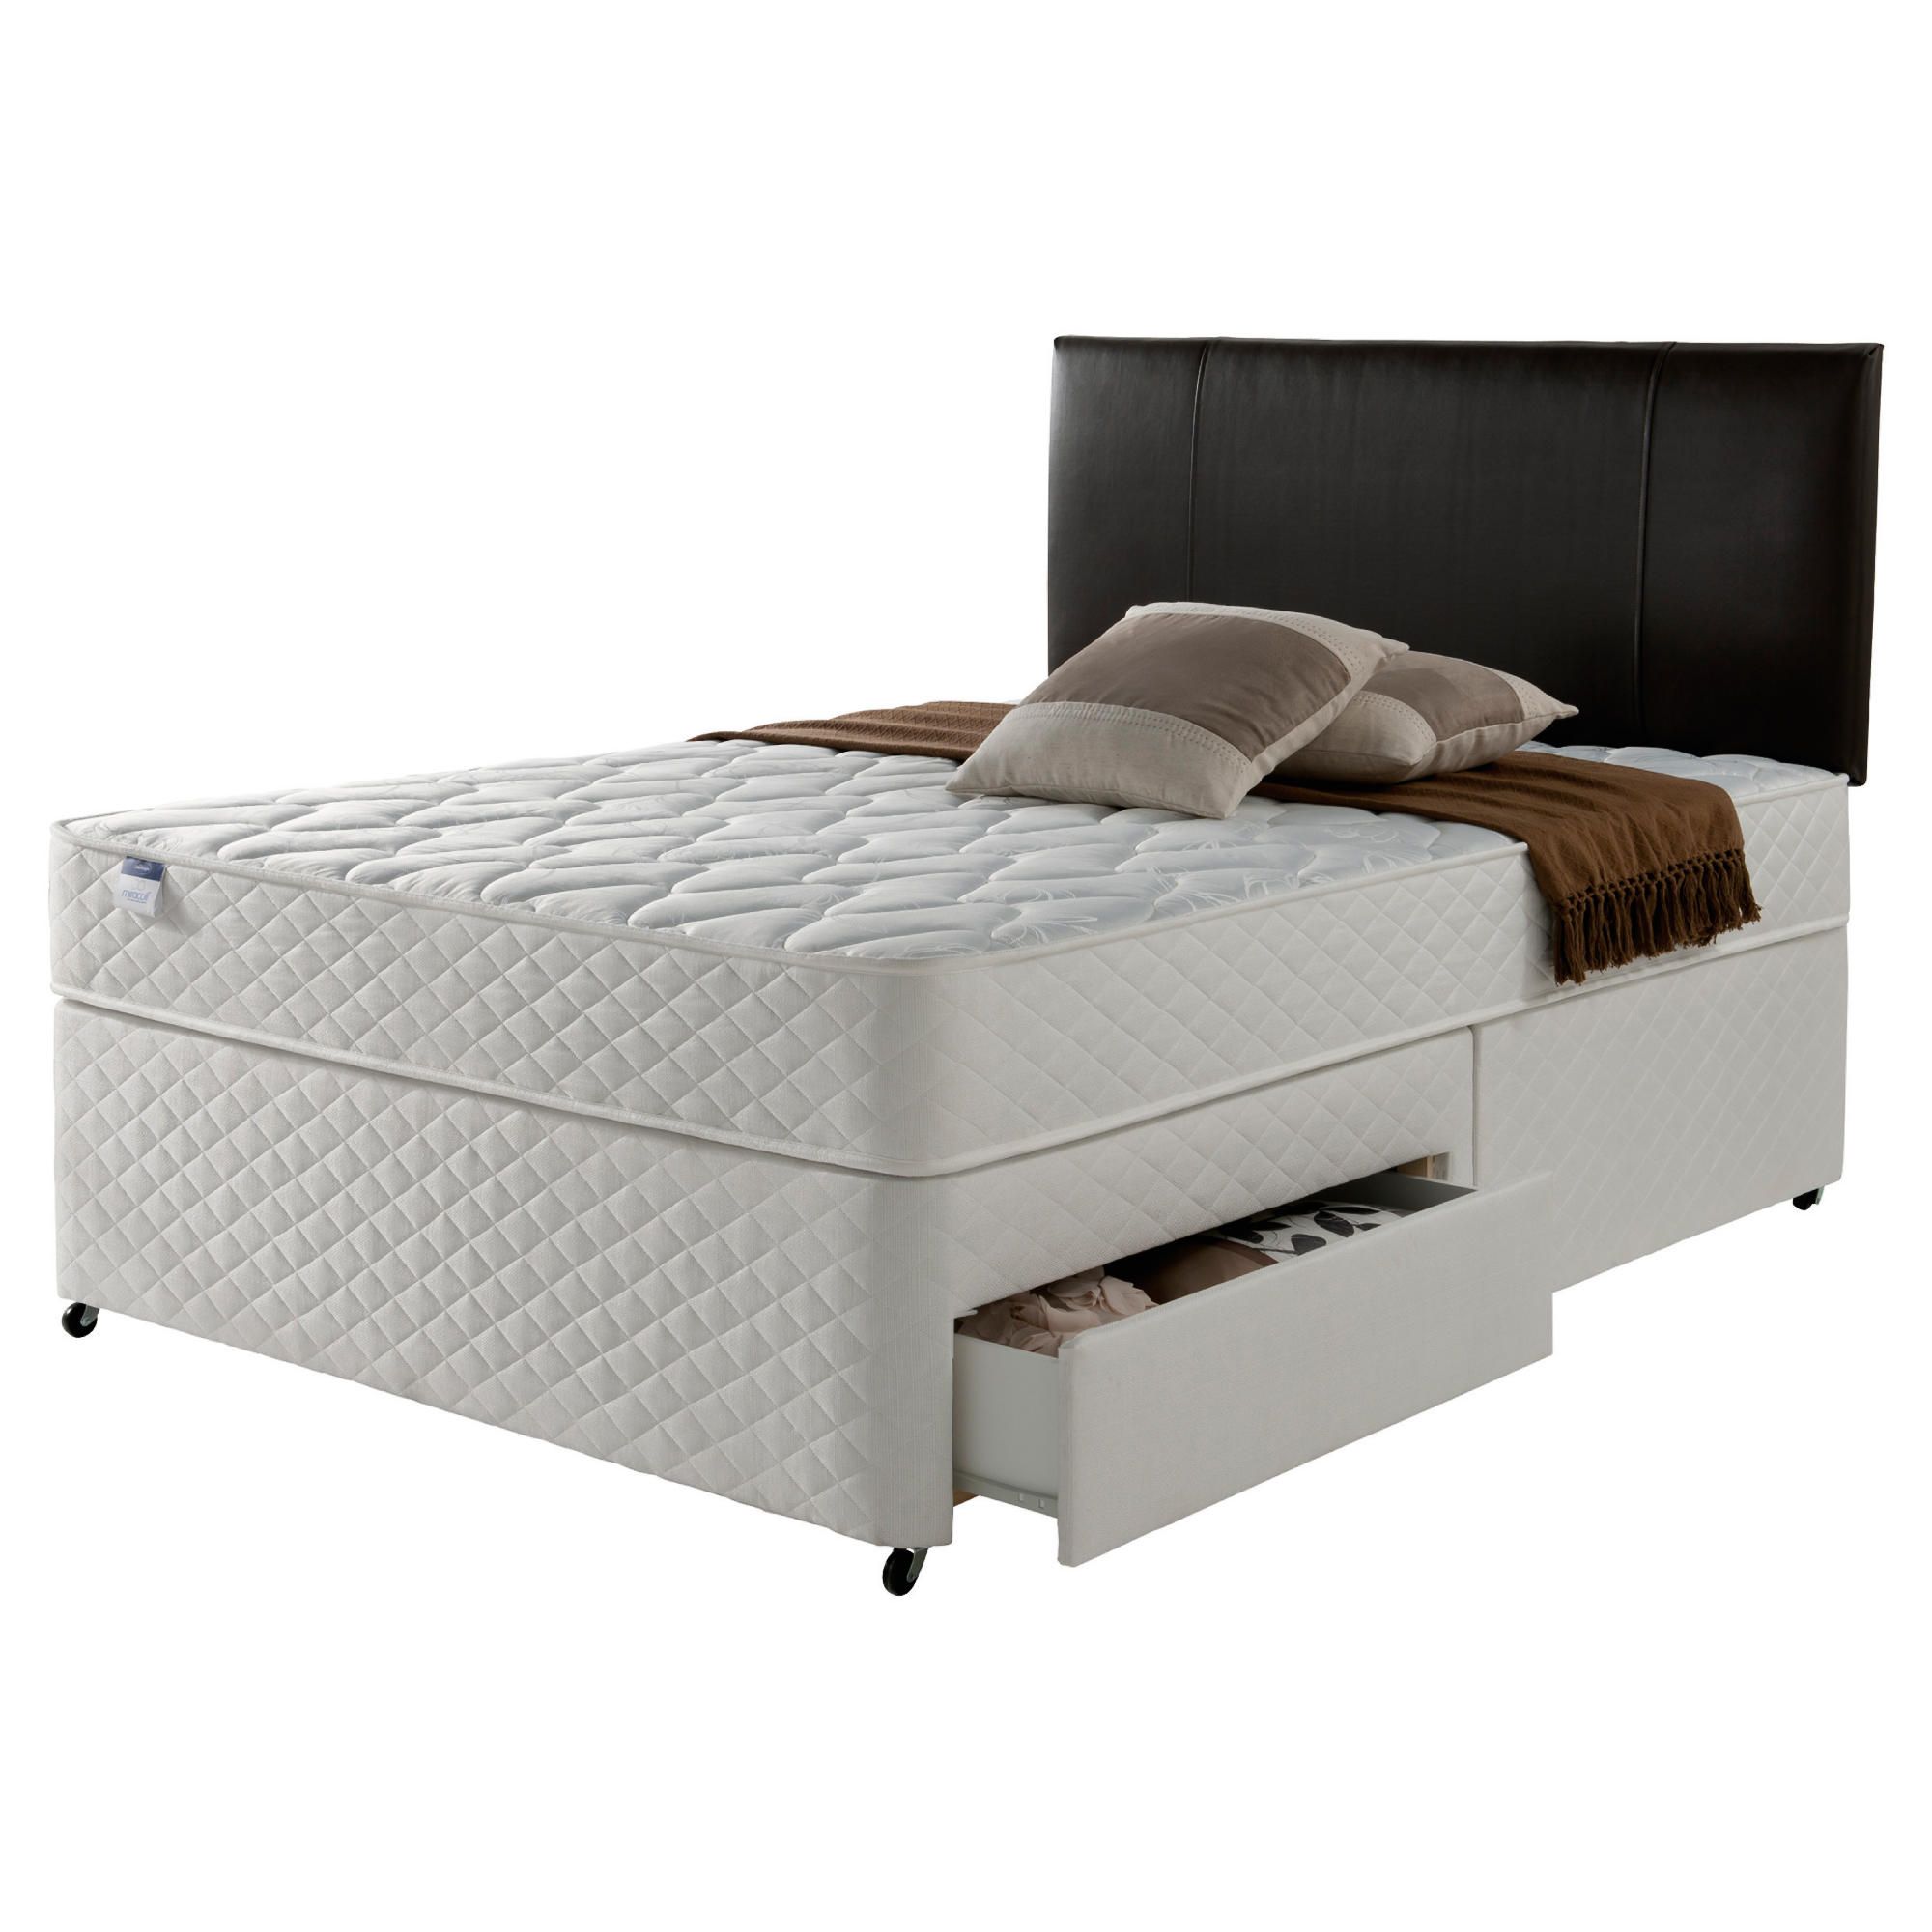 Silentnight Miracoil Comfort Micro Quilt 2 Drawer Divan, Small Double at Tesco Direct